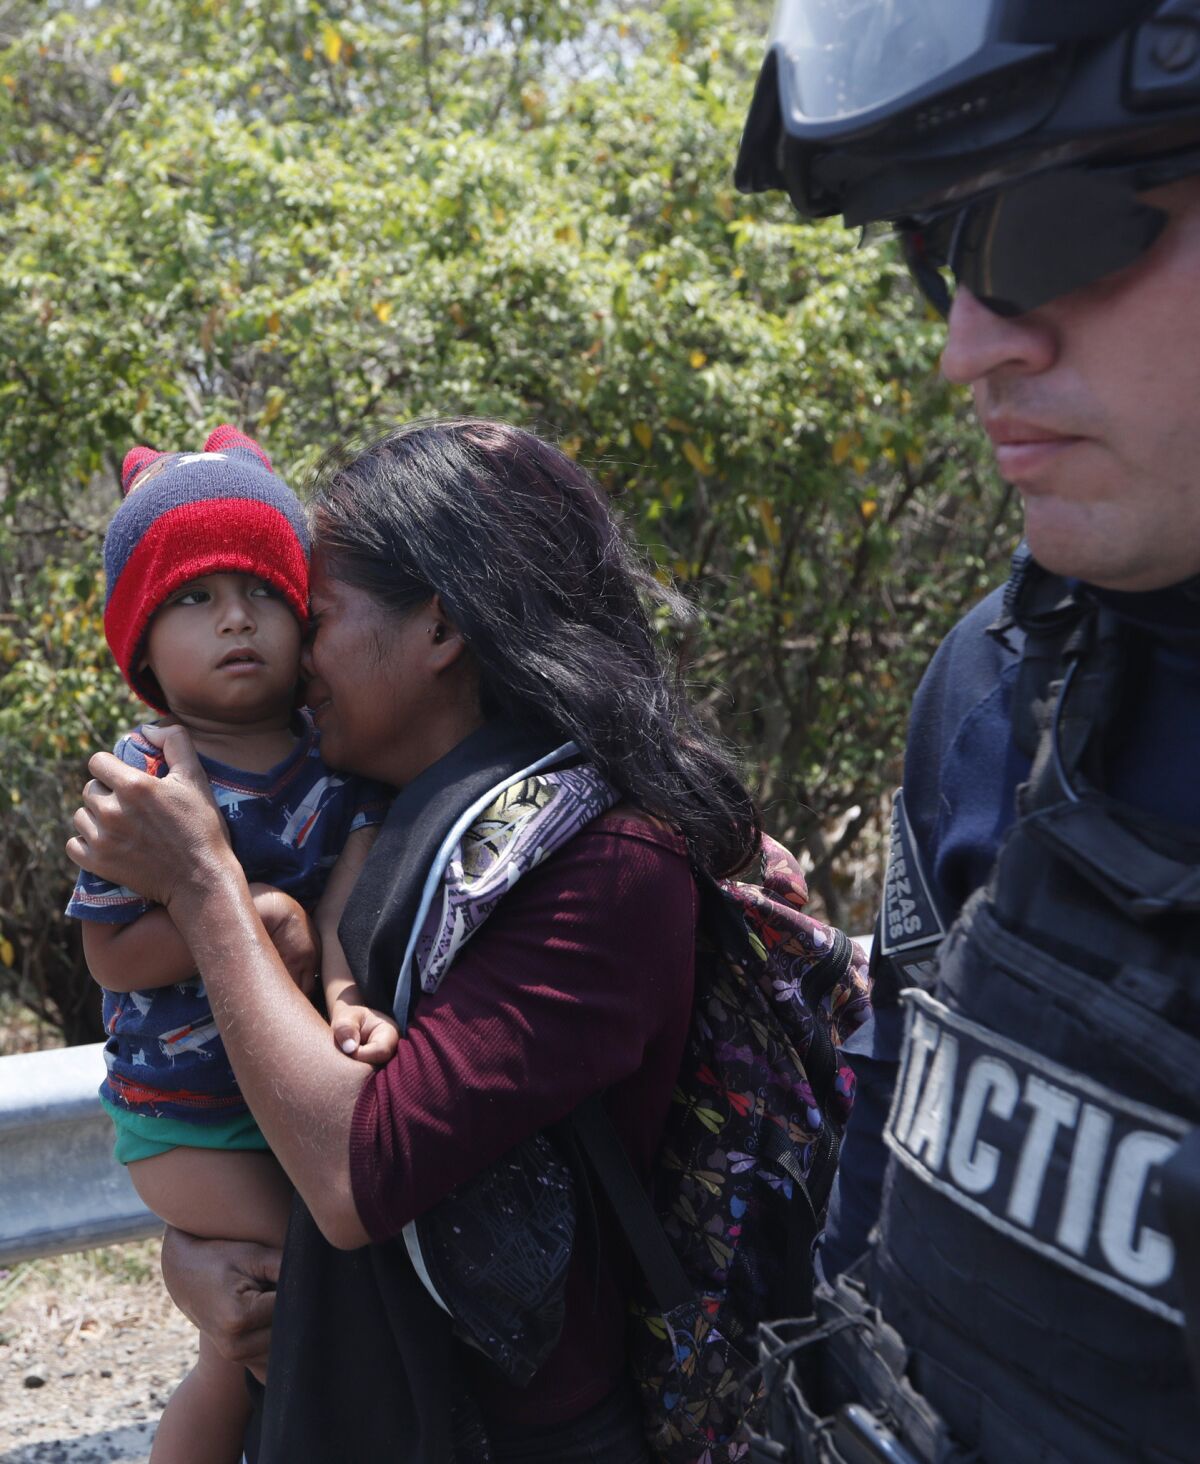 A Central American woman, with her son, is taken into custody April 22.